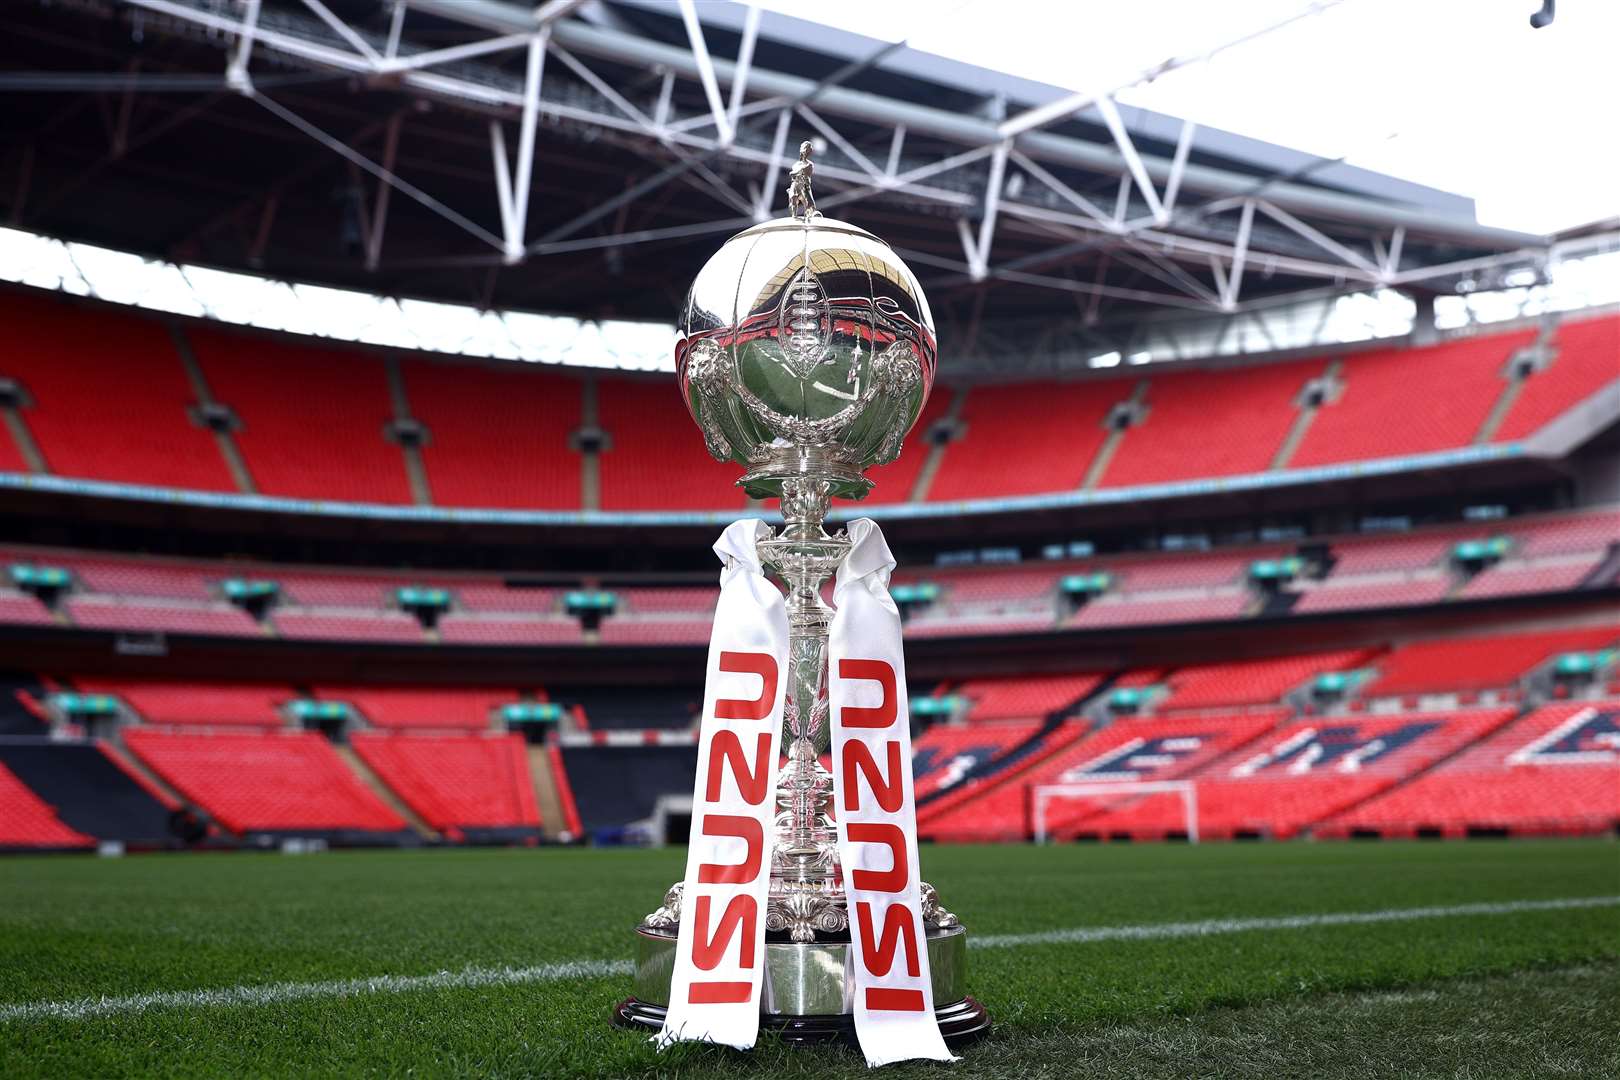 Maidstone are through to the last 16 of the FA Trophy. Picture: Ben Hoskins - The FA/The FA via Getty Images